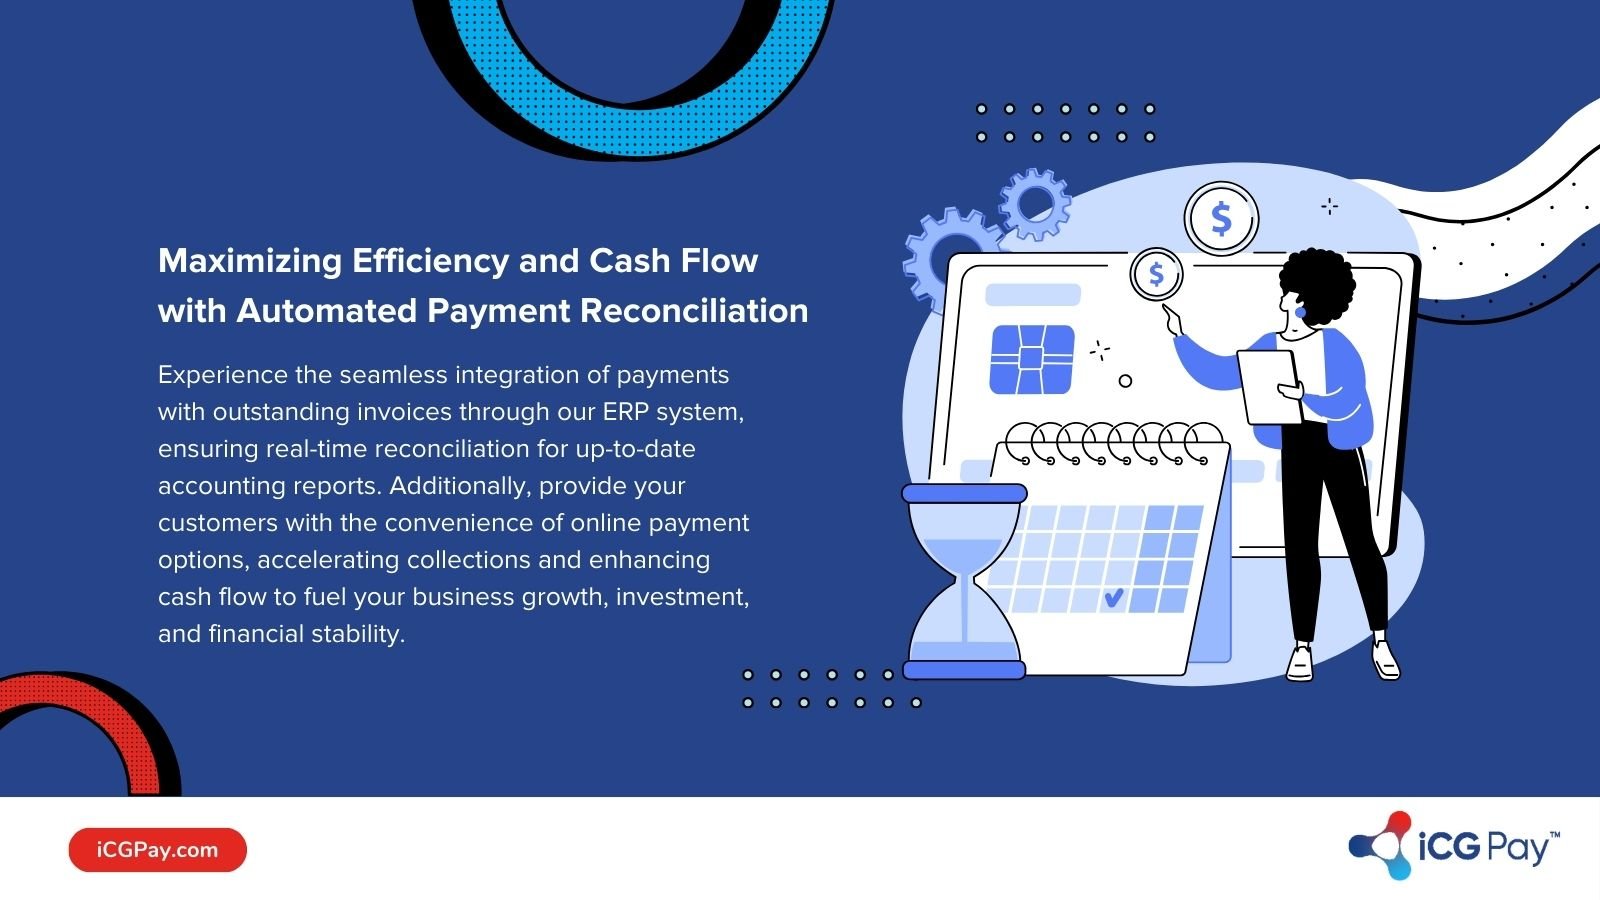 Automated payment reconciliation